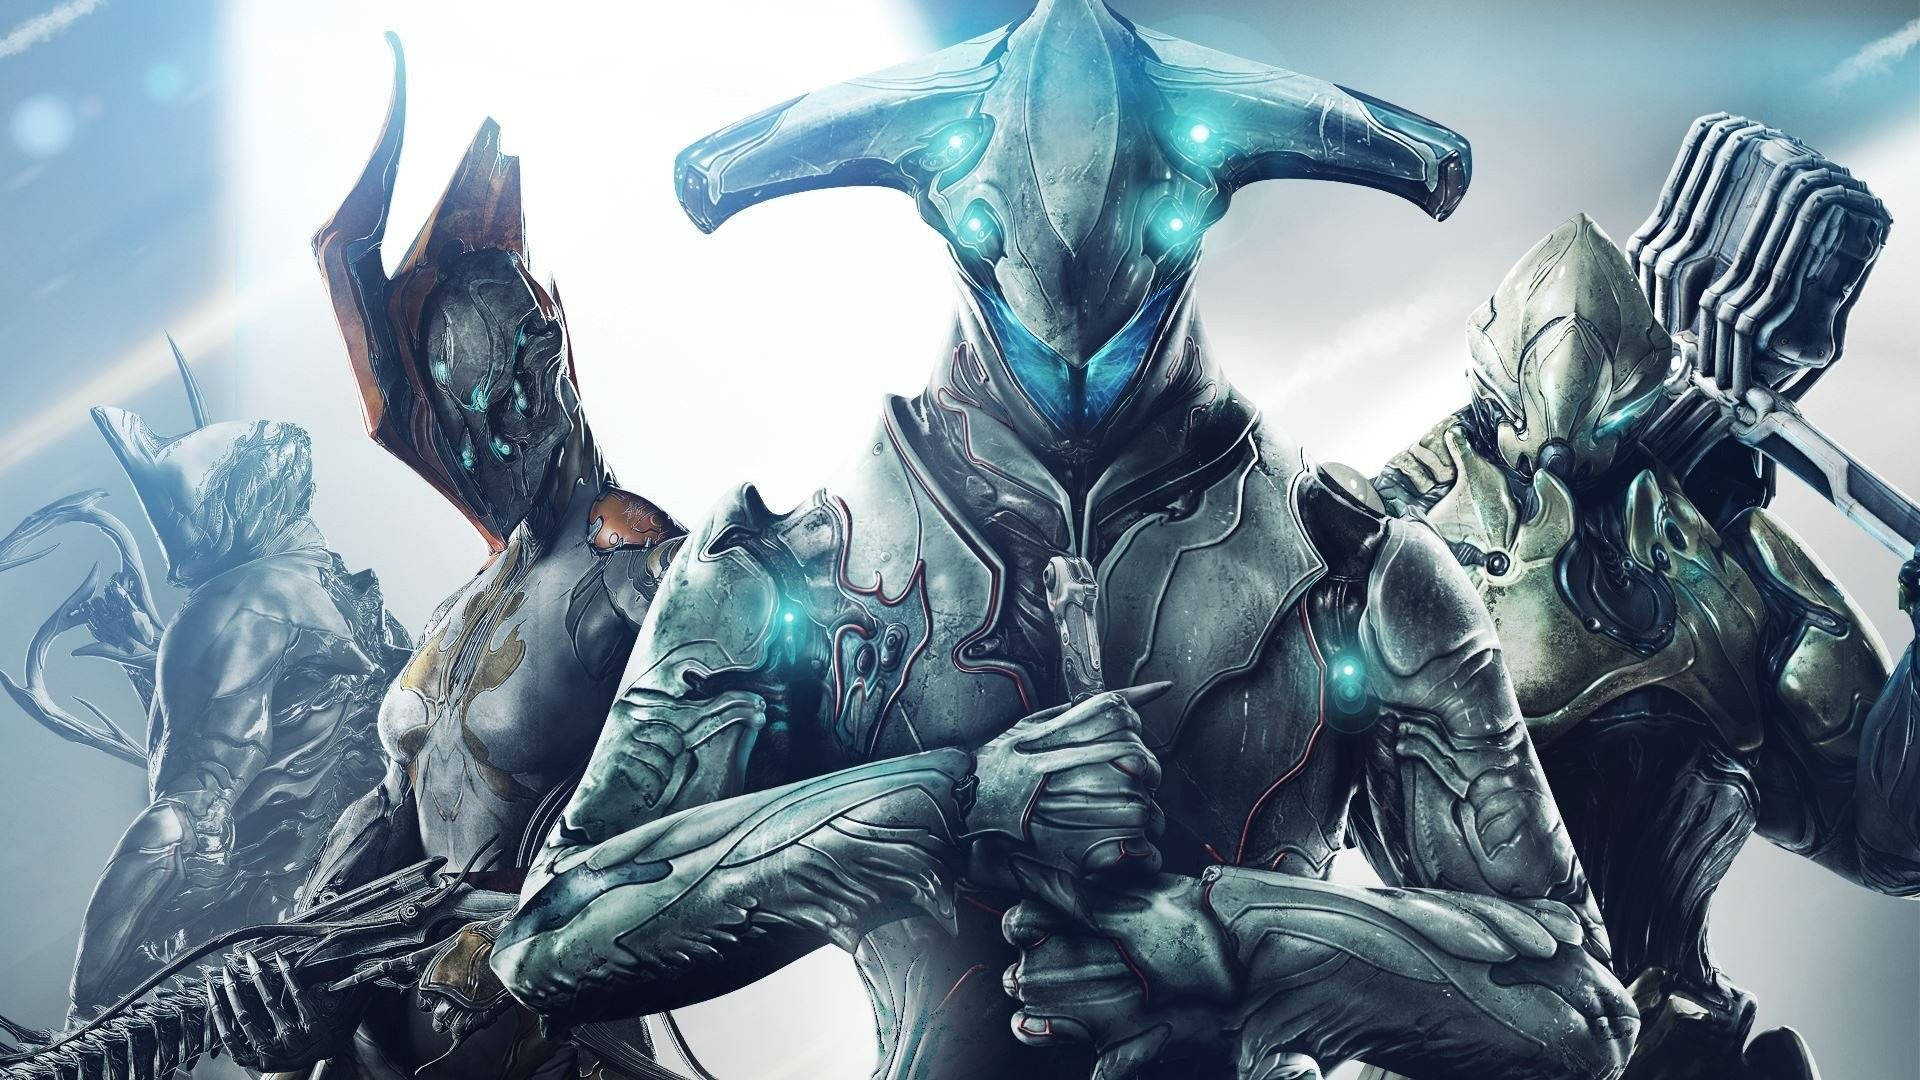 Warframe Tenno ancient soldiers with metallic-like armored body wallpaper.